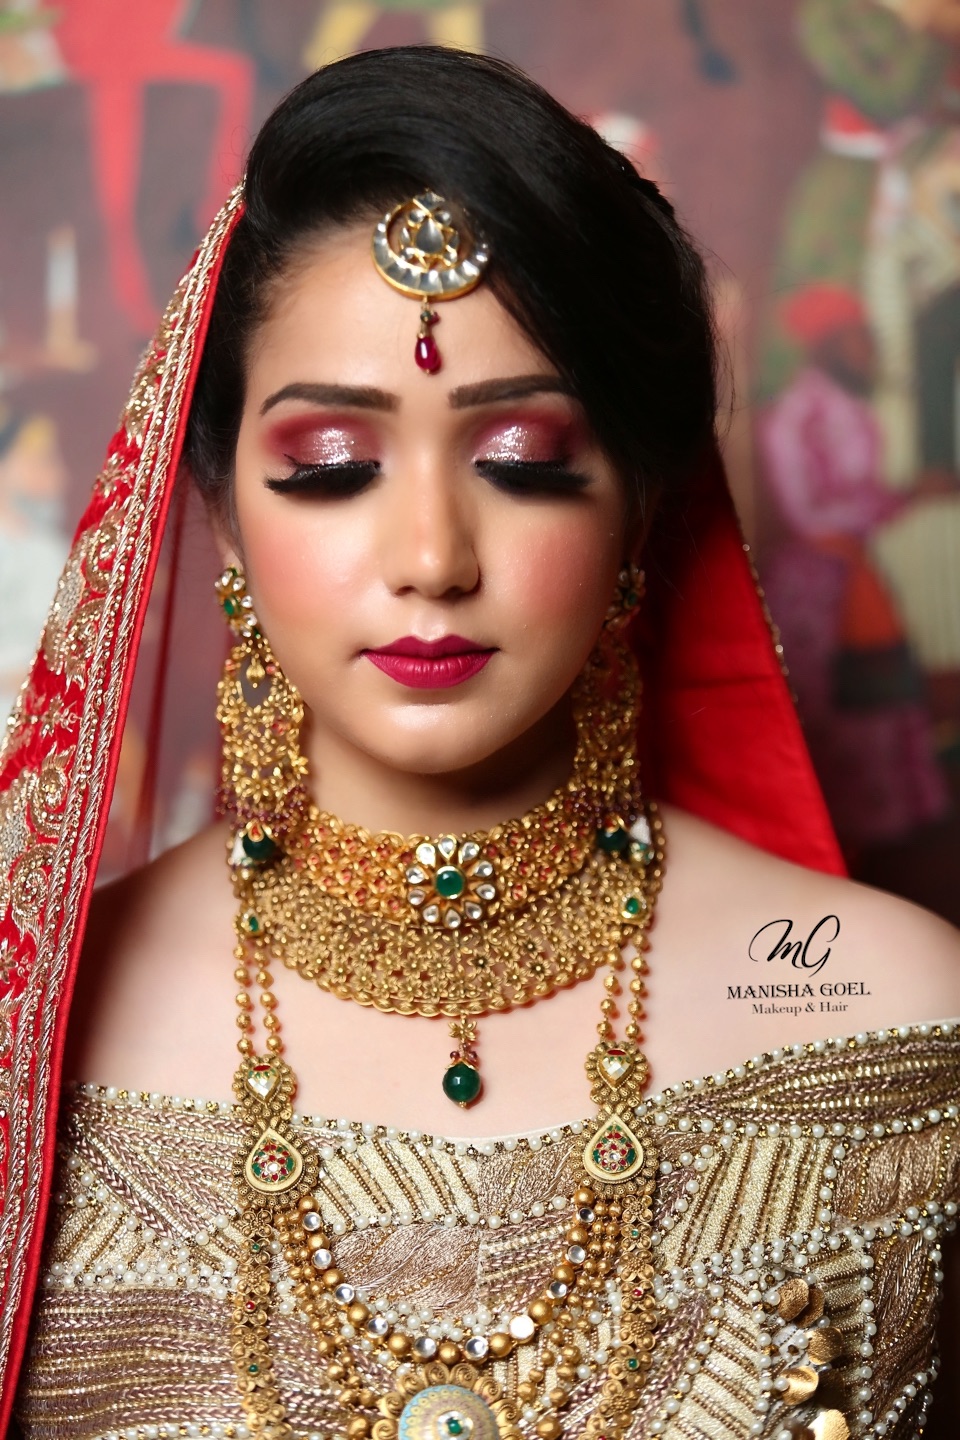 Manisha Goel Makeup Artist Services, Review and Info - Olready